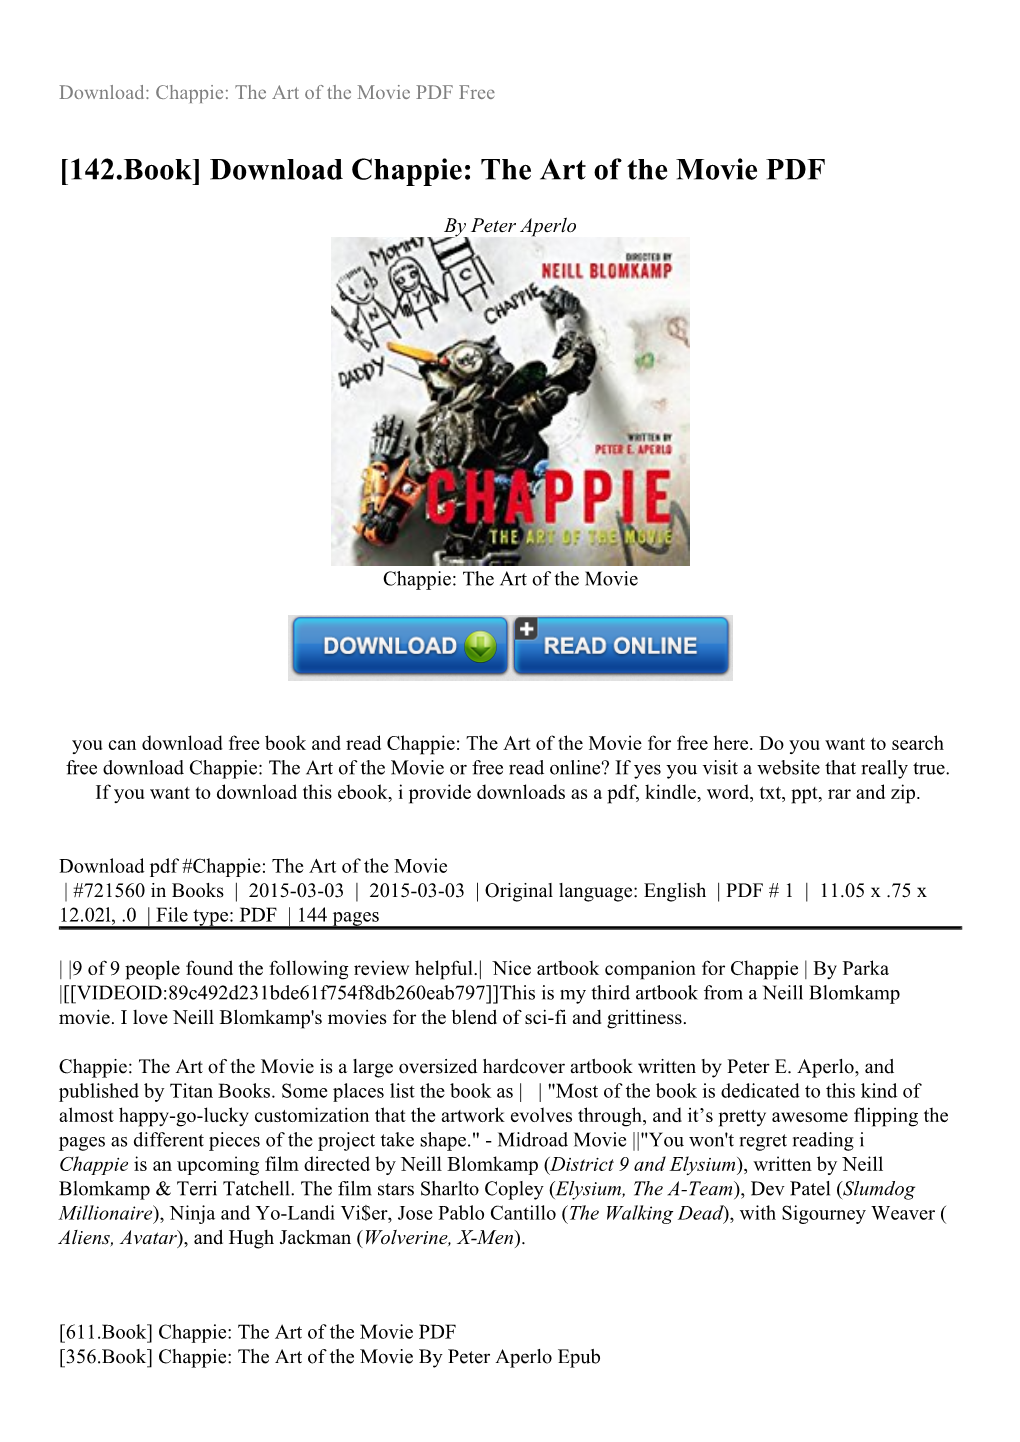 Download Chappie: the Art of the Movie PDF